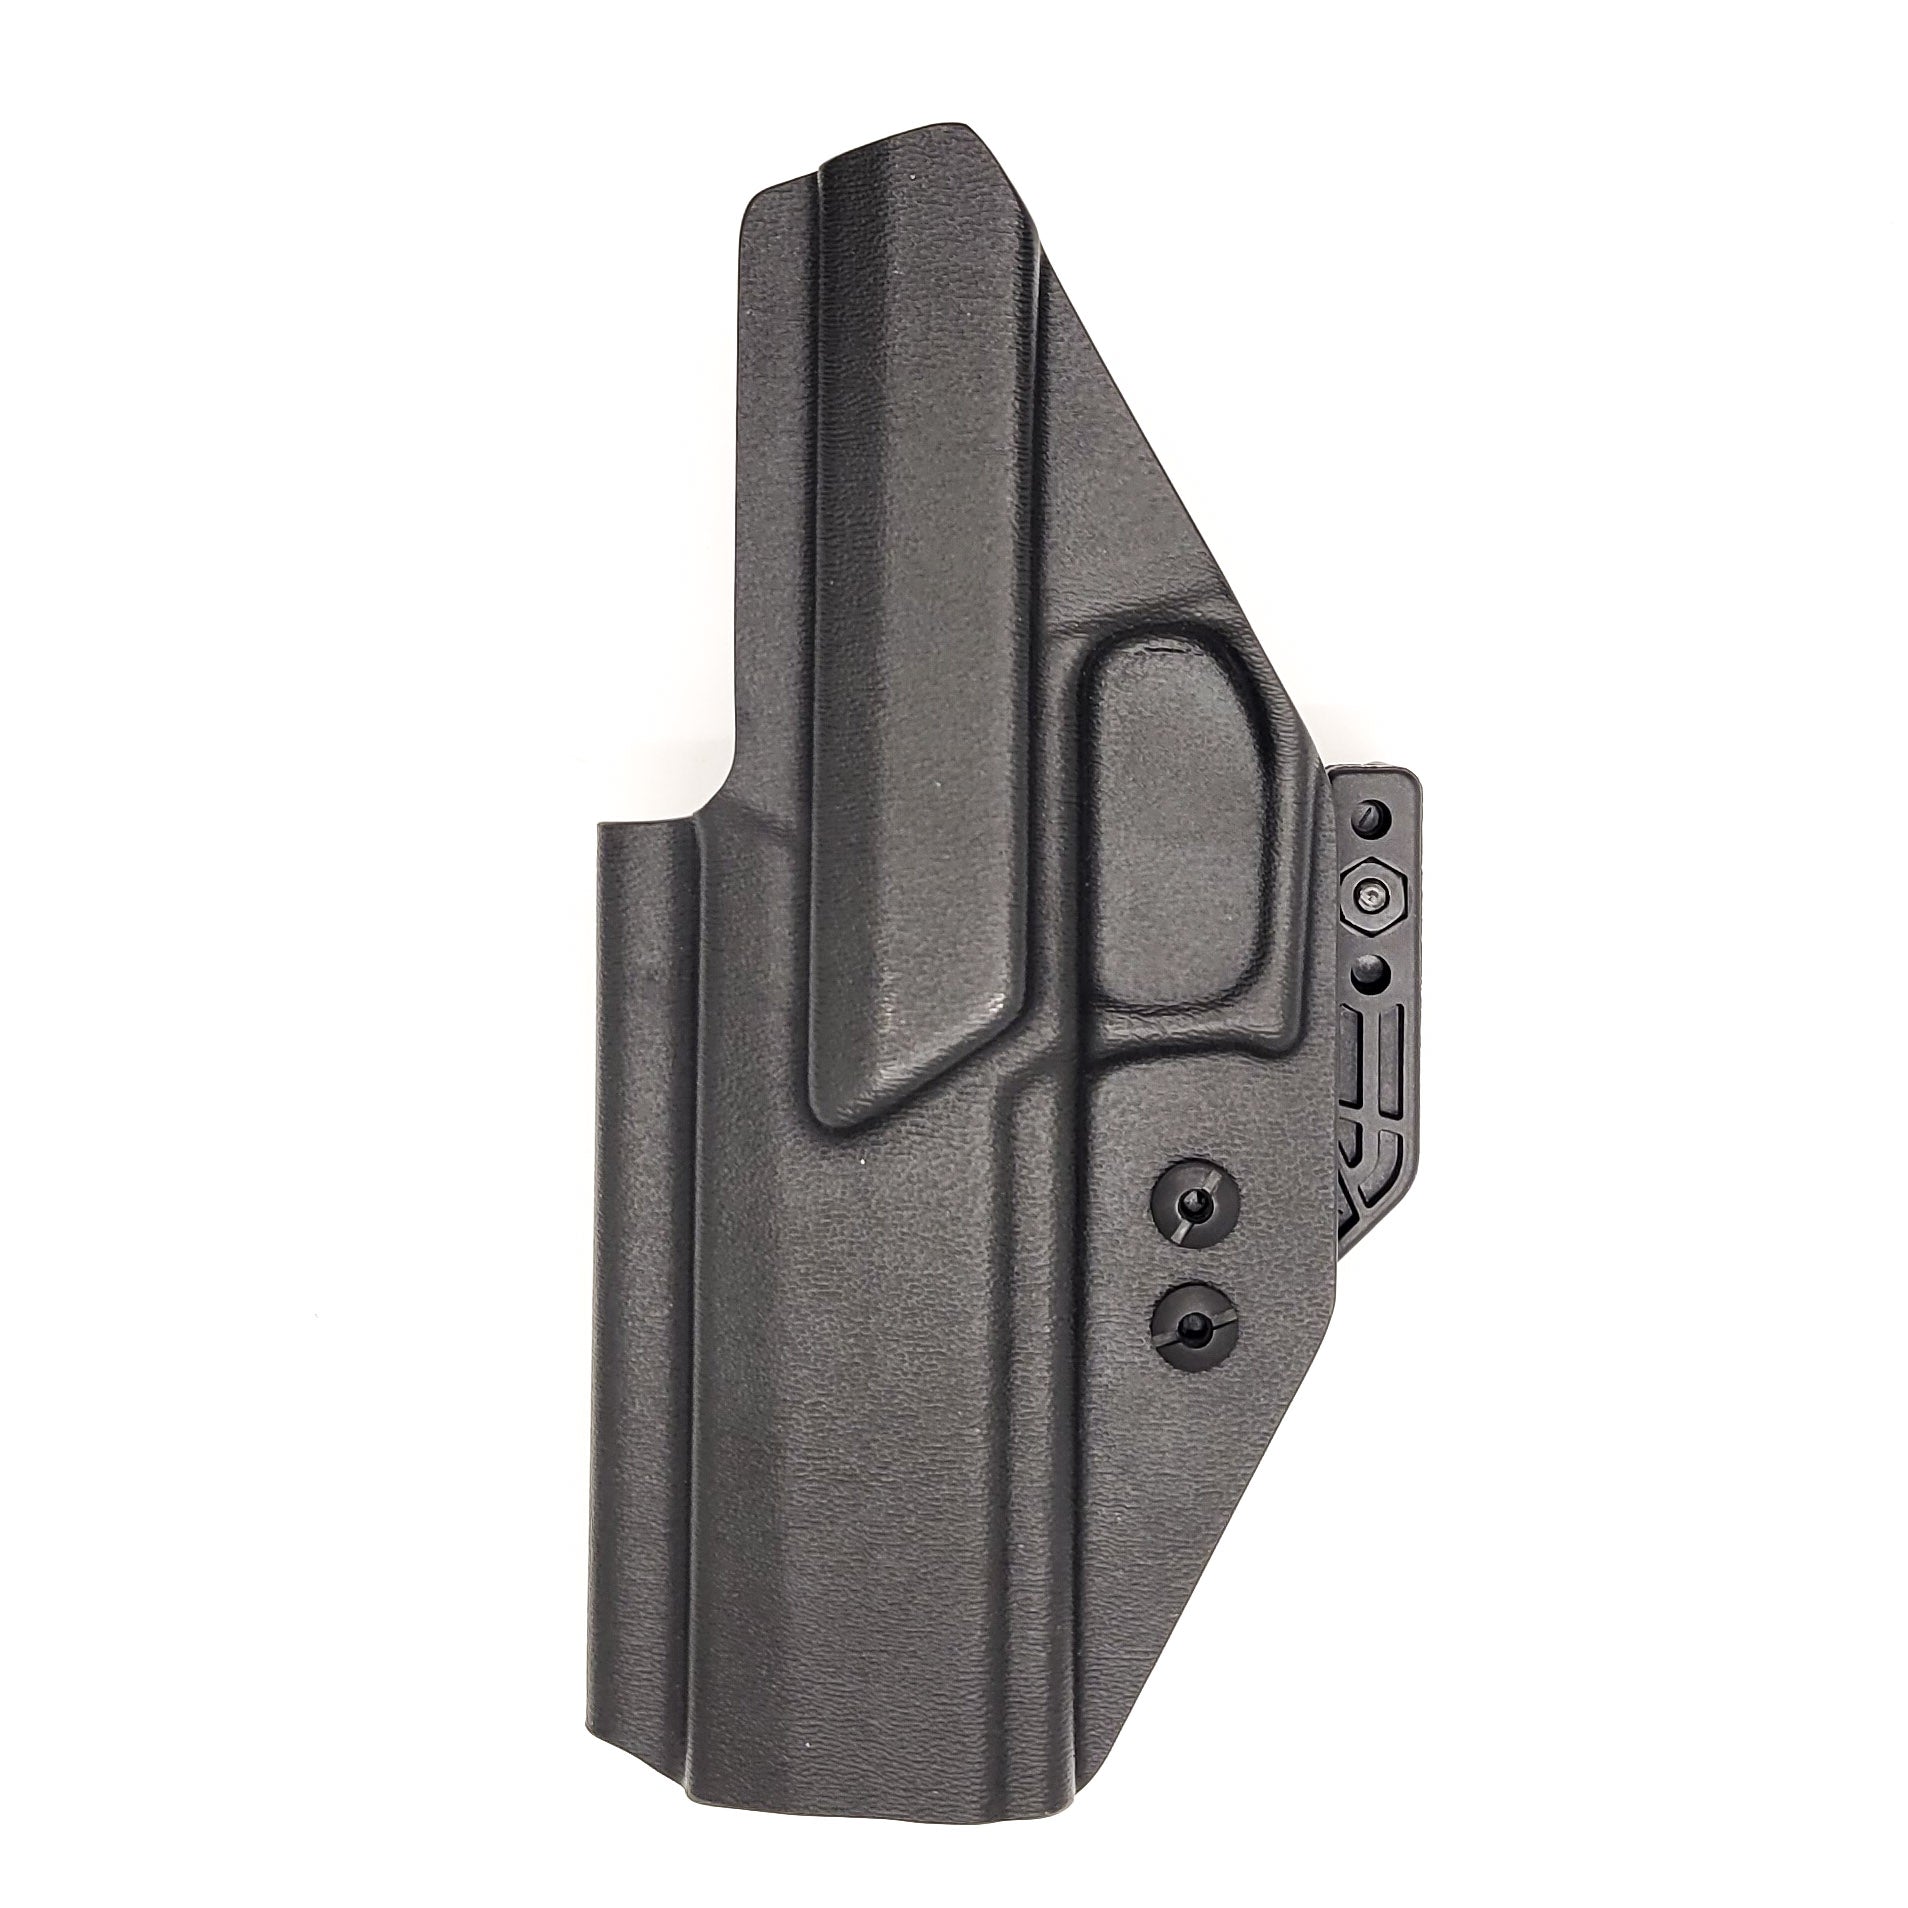 Our Inside Waistband Gas Pedal holster for the Sig Sauer P320 is vacuum formed with a precision machined mold designed from a CAD model of the actual firearm. Each holster is formed, trimmed and folded in house.  This holster will fit the P320 Full Size, X-Five, M17, M18, X-Carry and others with the GoGun USA Gas Pedal CG installed.  